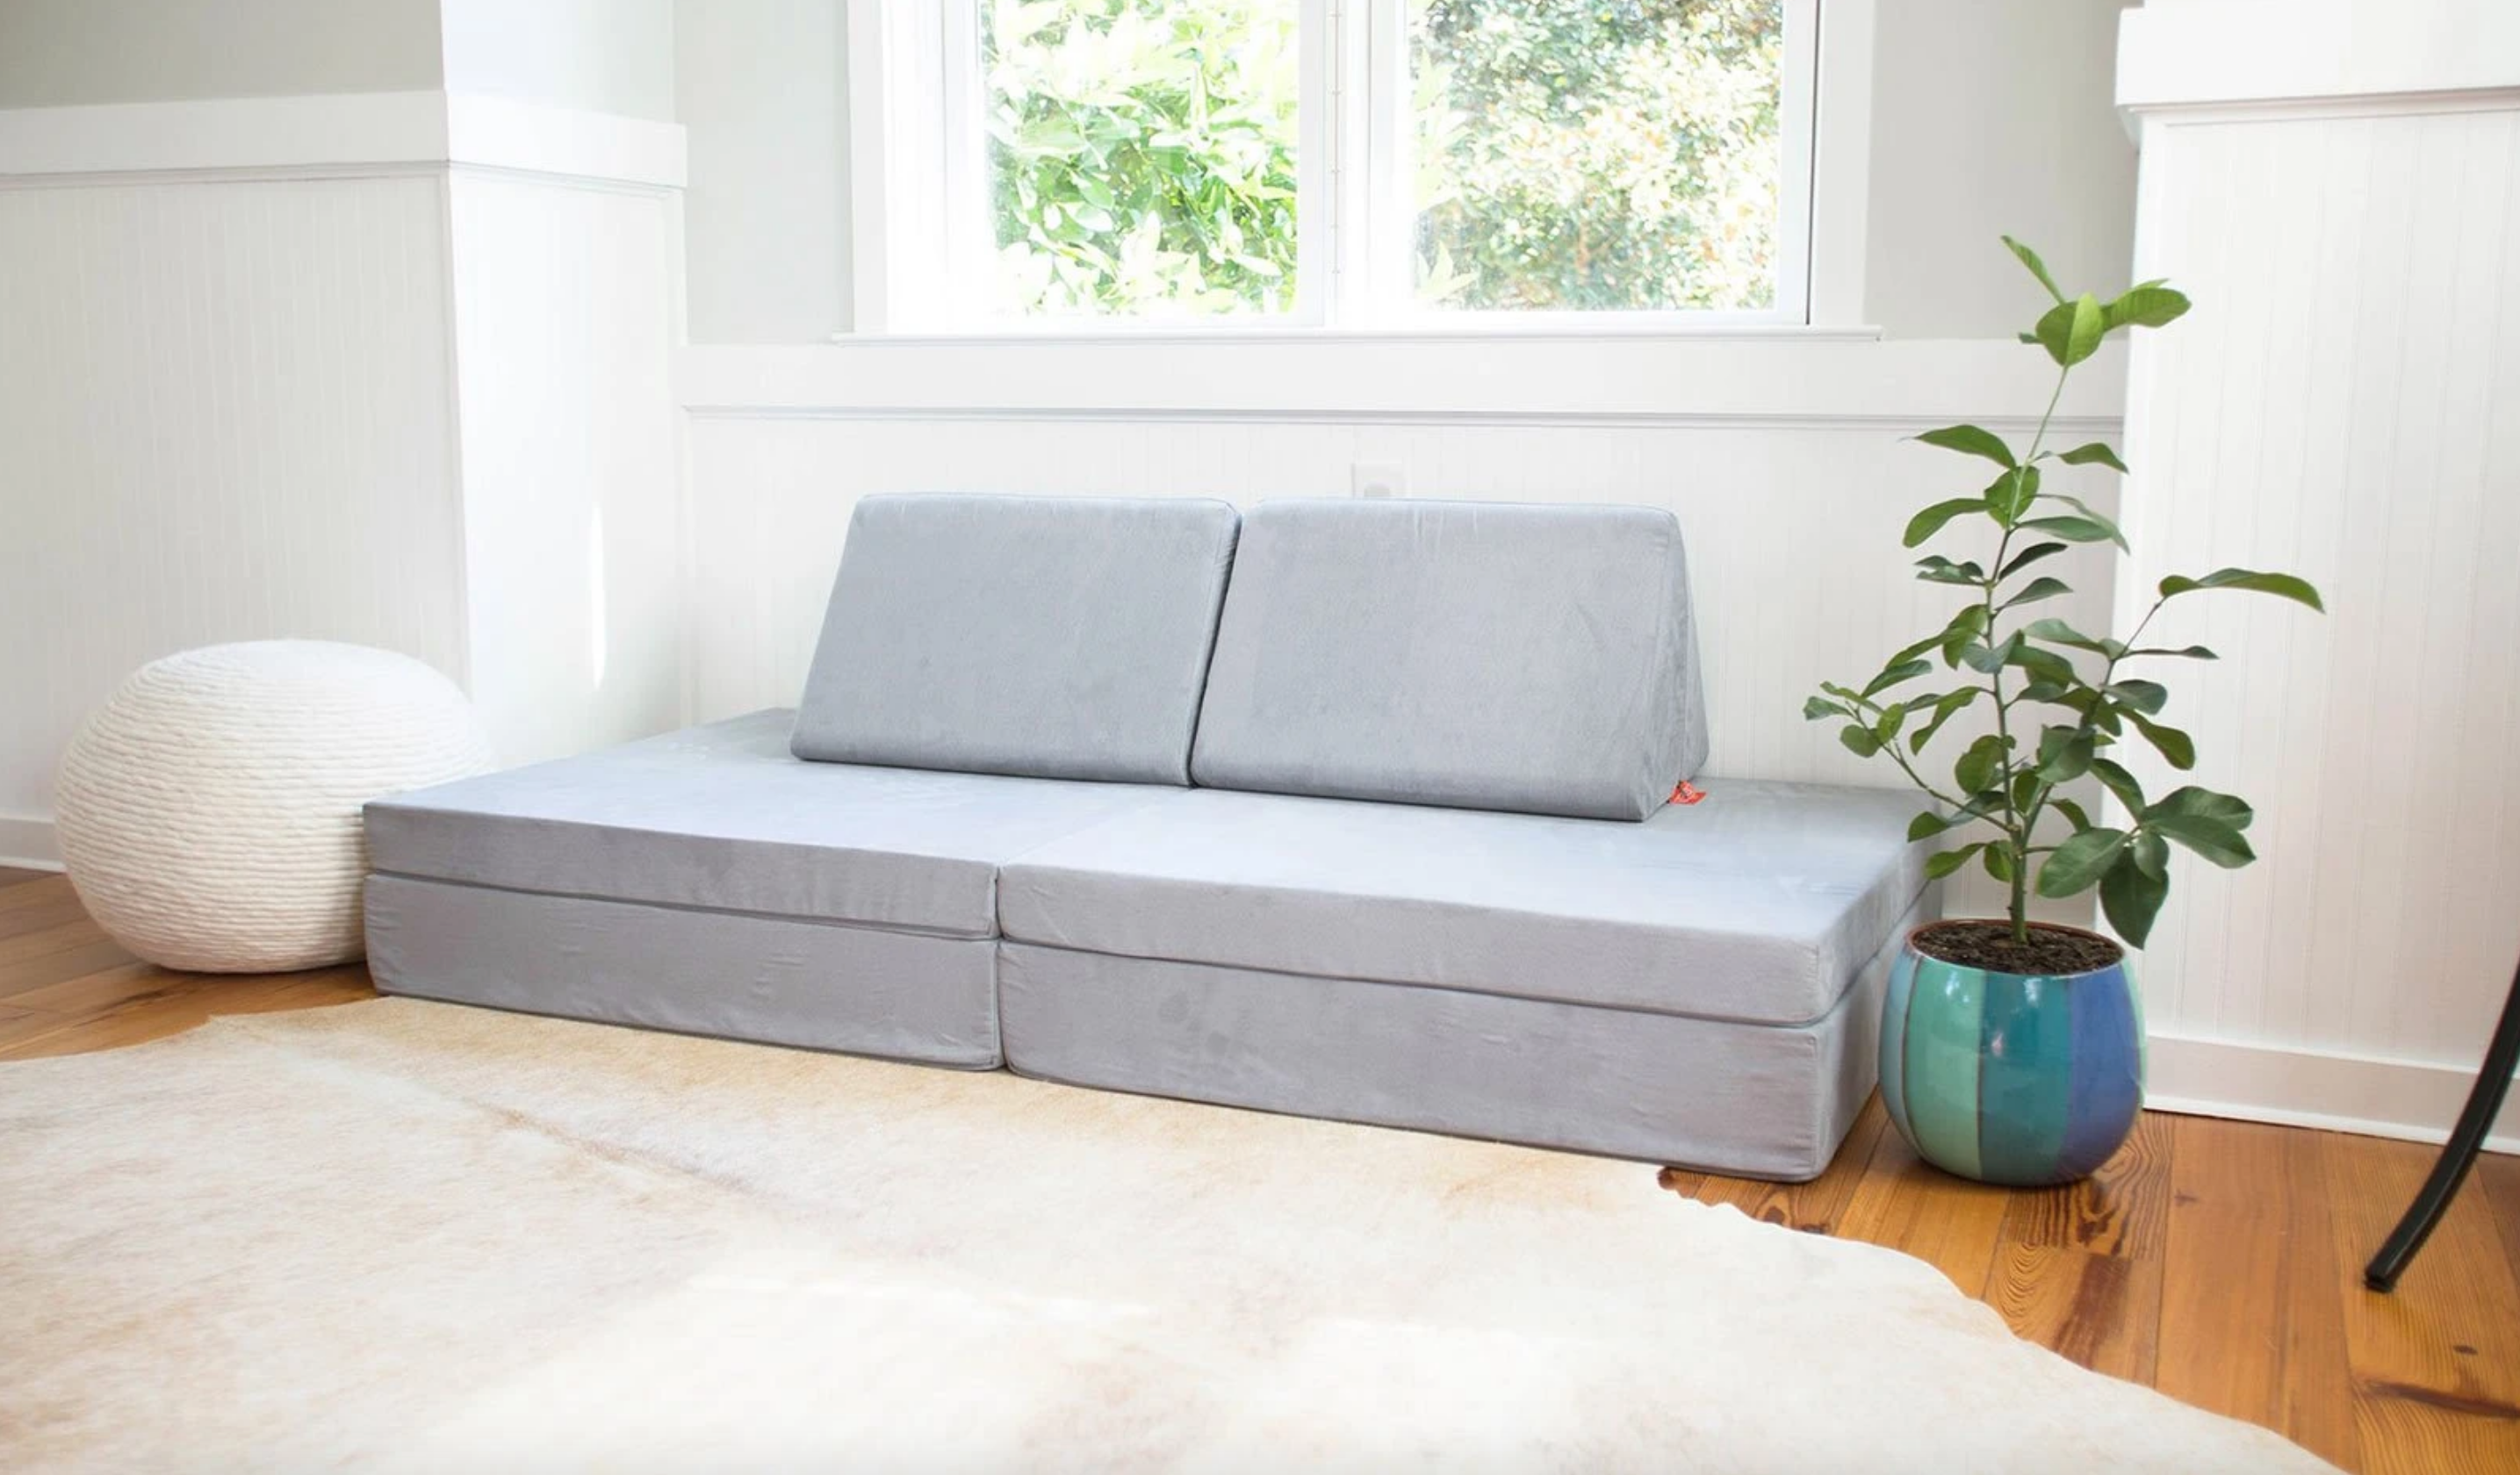 Light gray nugget sofa in room next to potted plant.